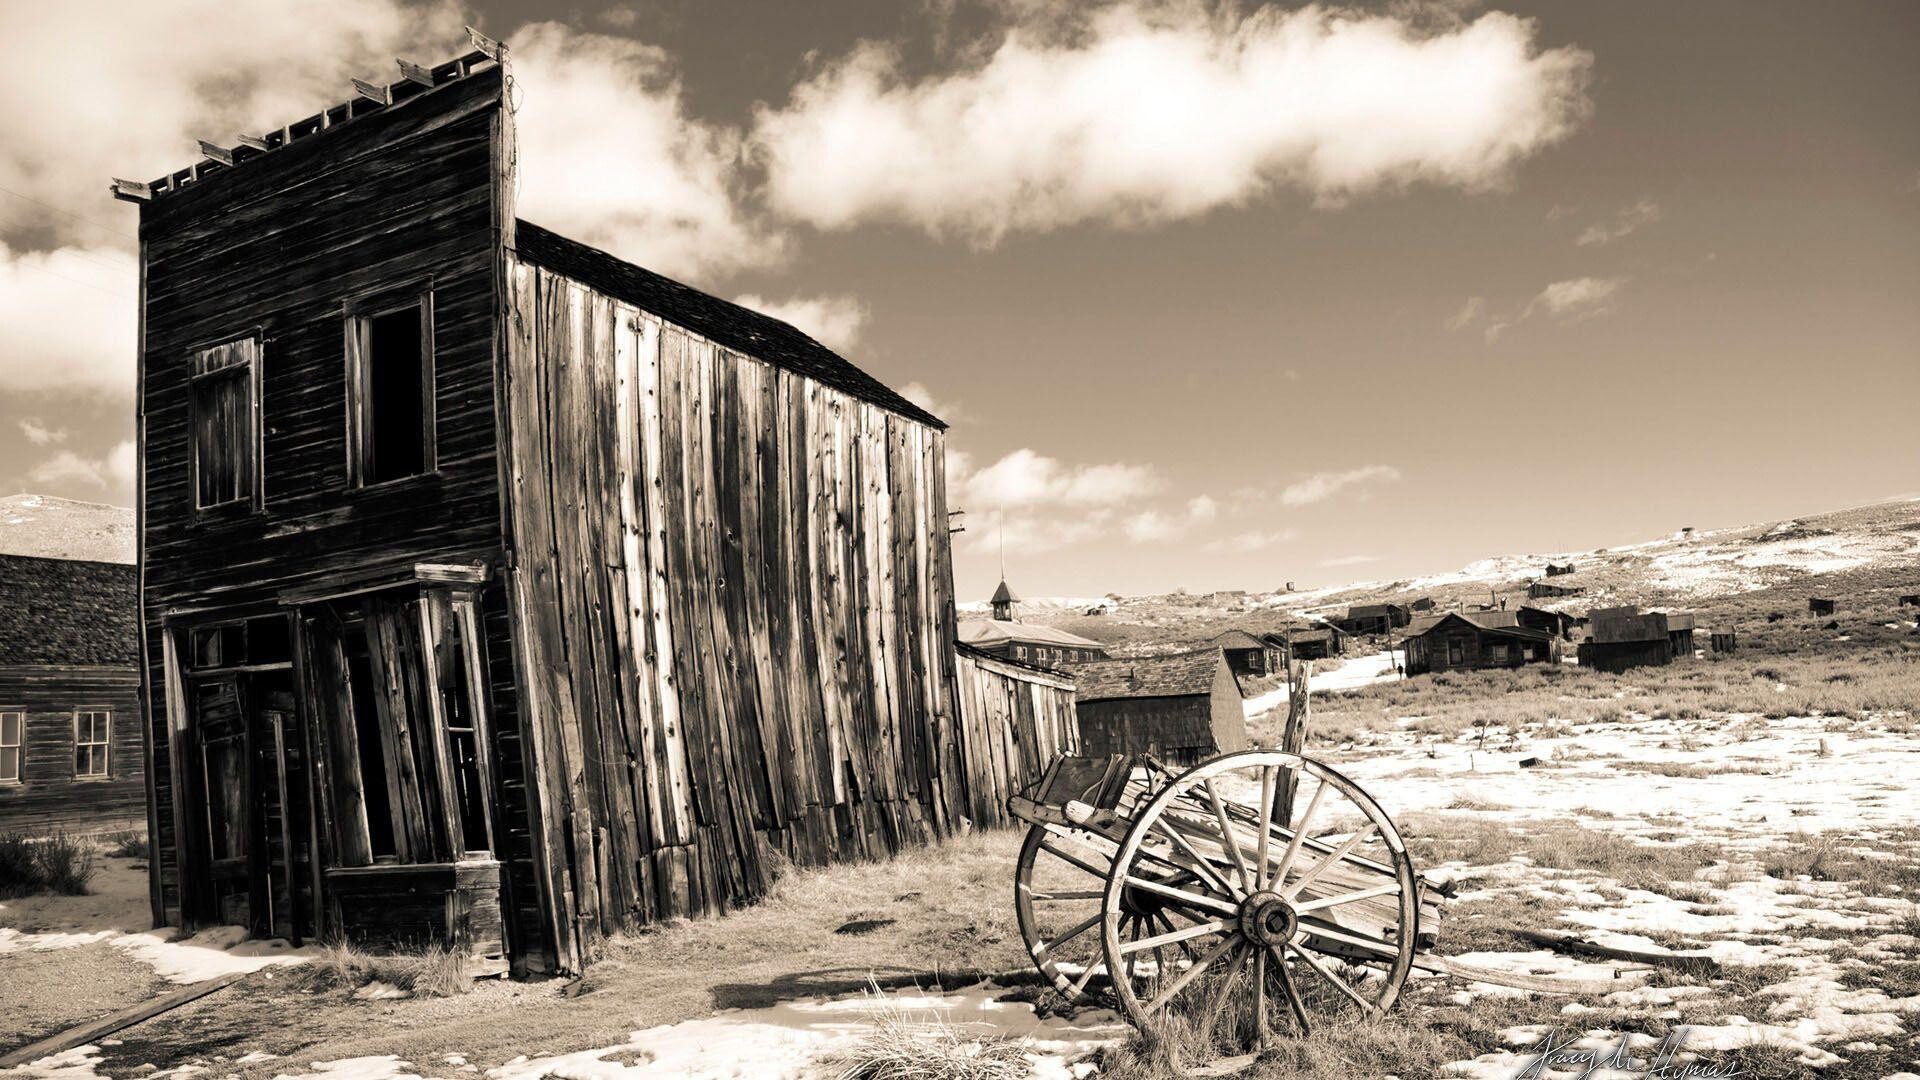 Ghost Town: Used as film sets for Western movies and other productions. 1920x1080 Full HD Background.